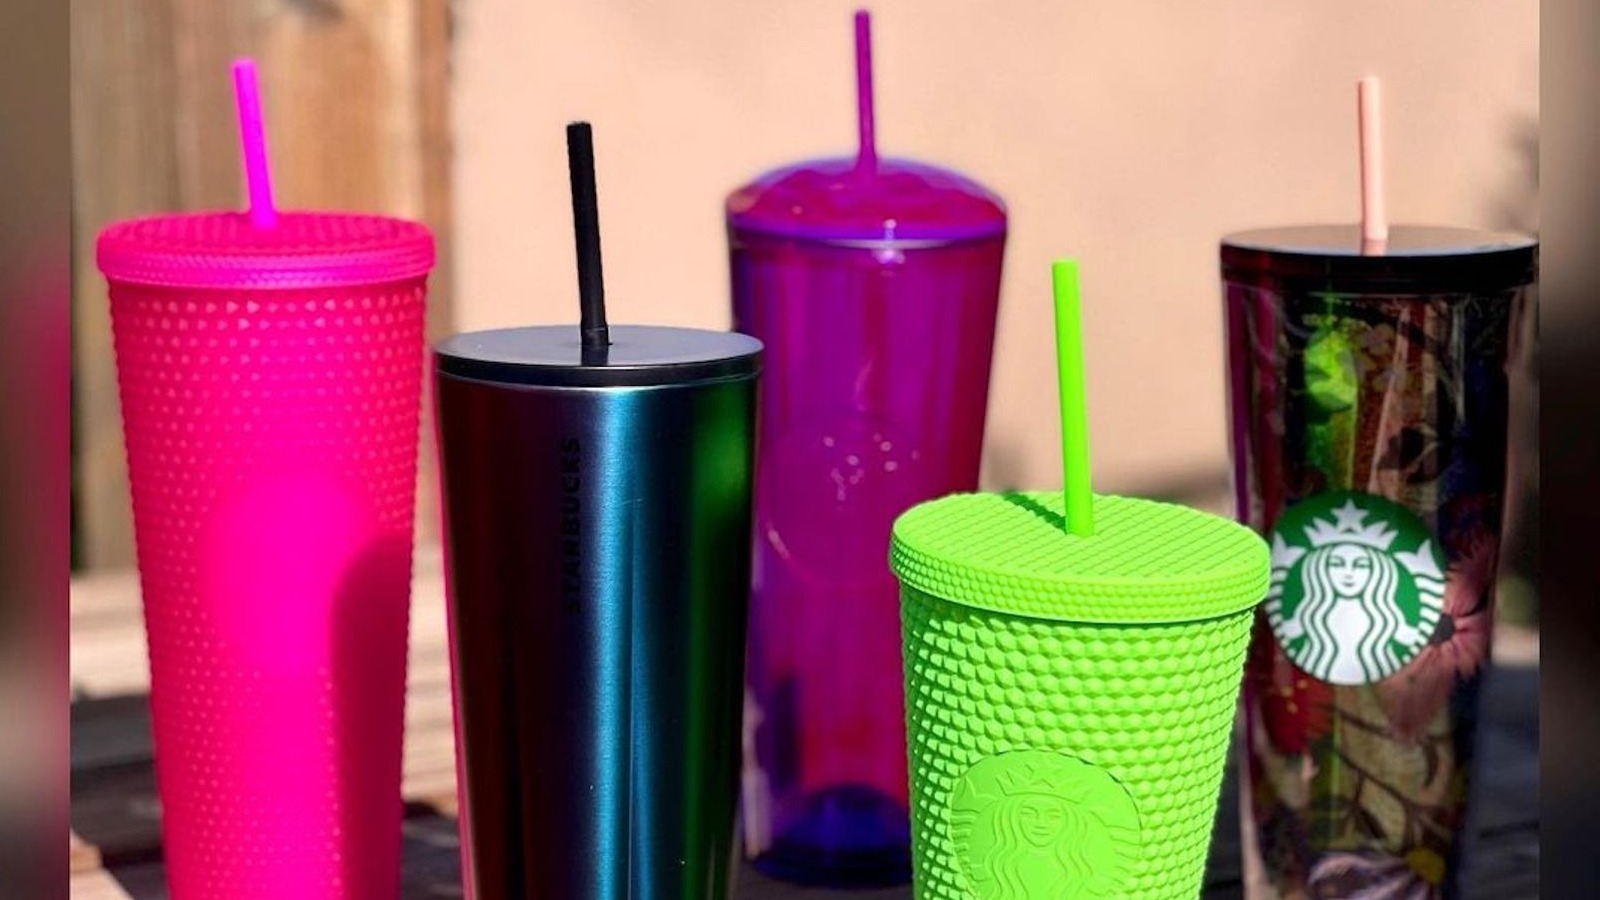 Best Starbucks Tumblers 2021: Prices, Where to Buy